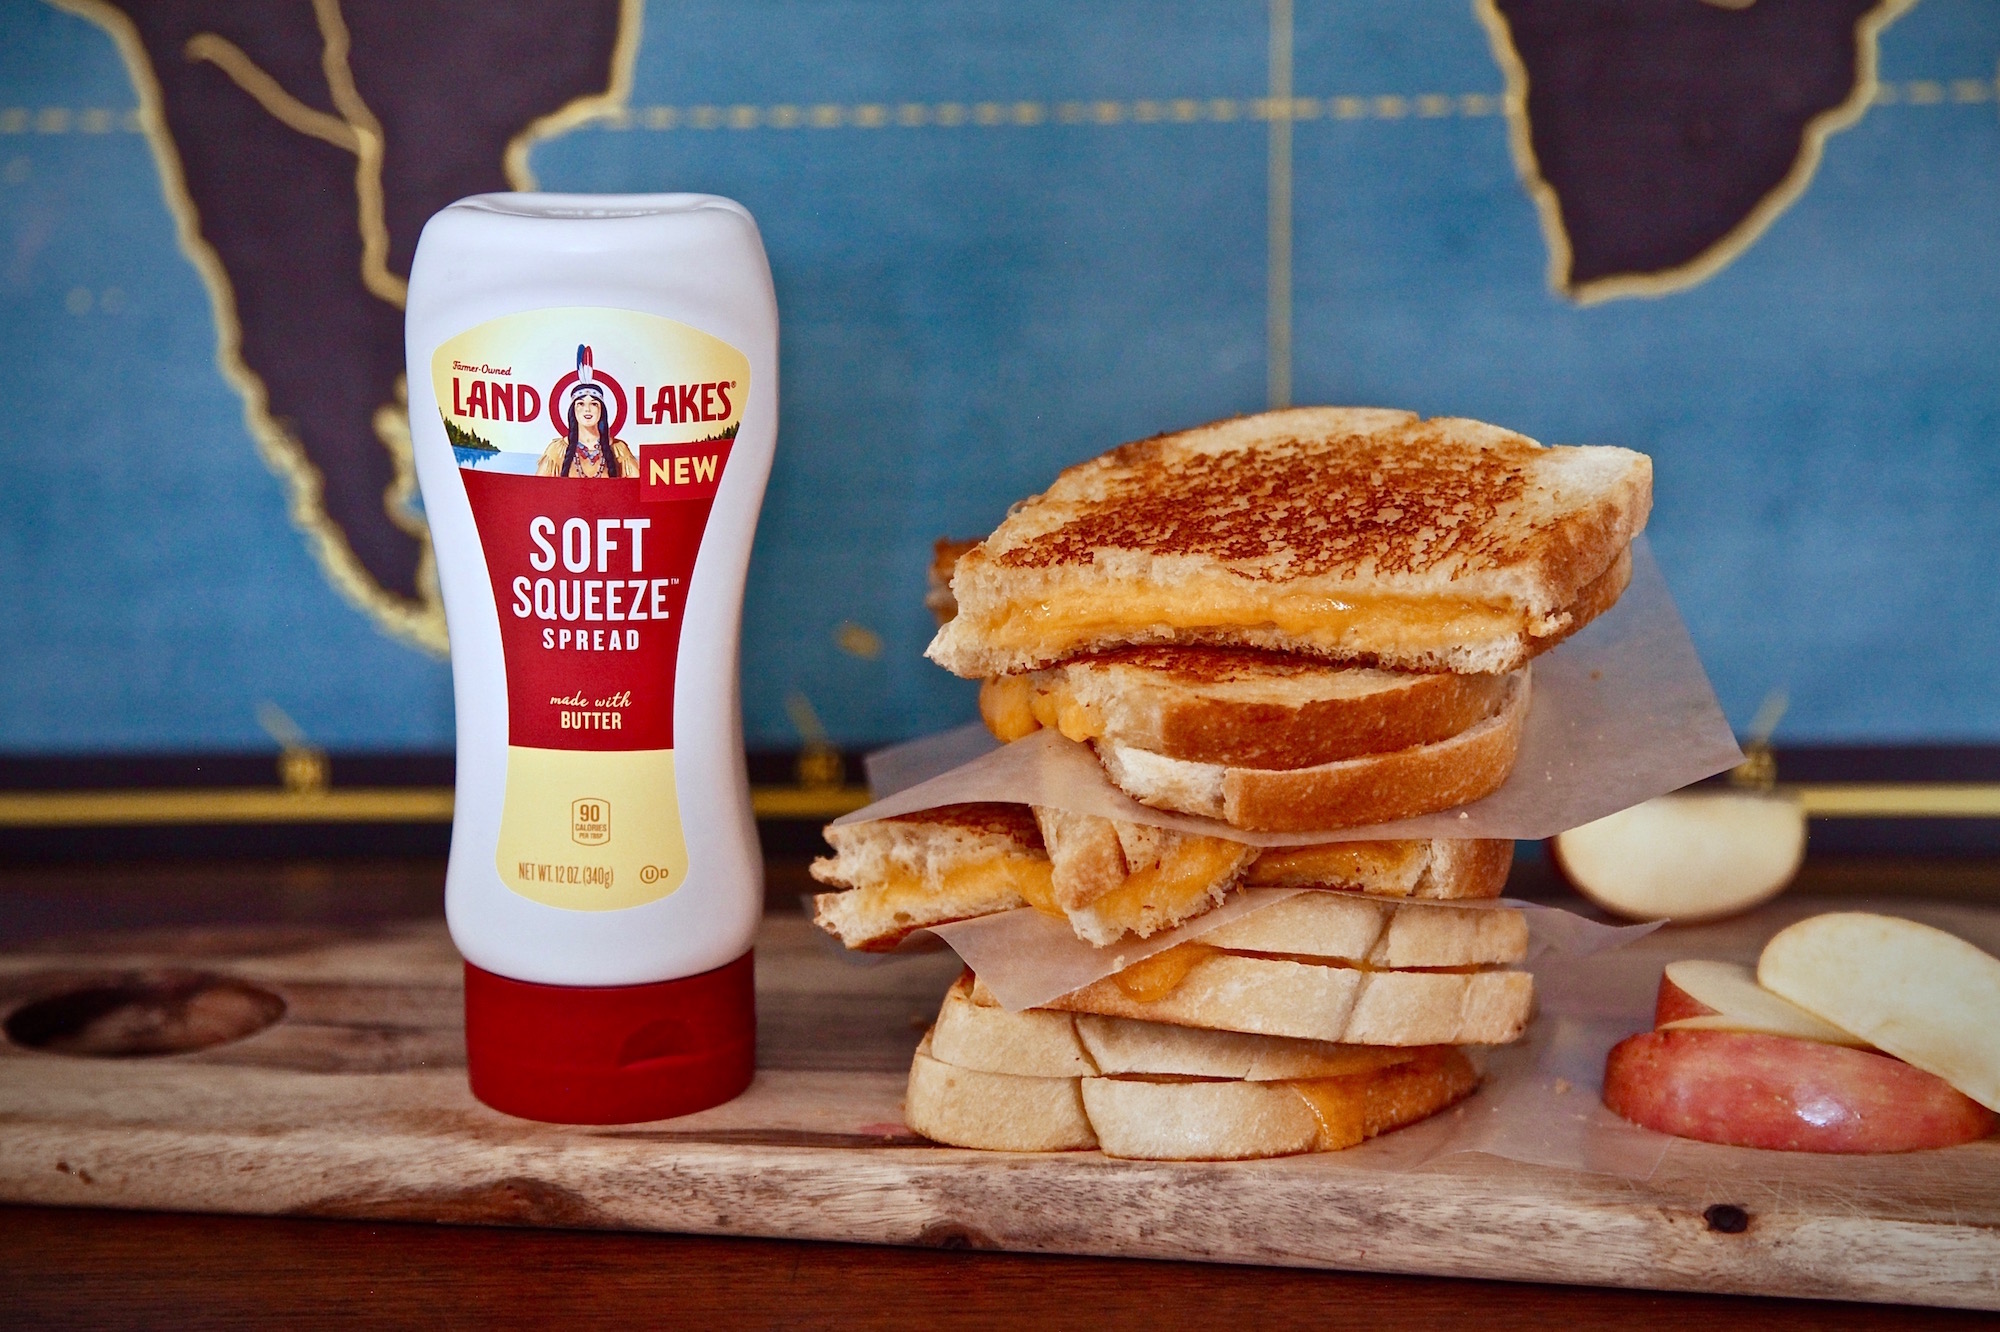 Easiest Crispy Grilled Cheese Sandwich With New Land O’ Lakes Soft Squeeze Spread